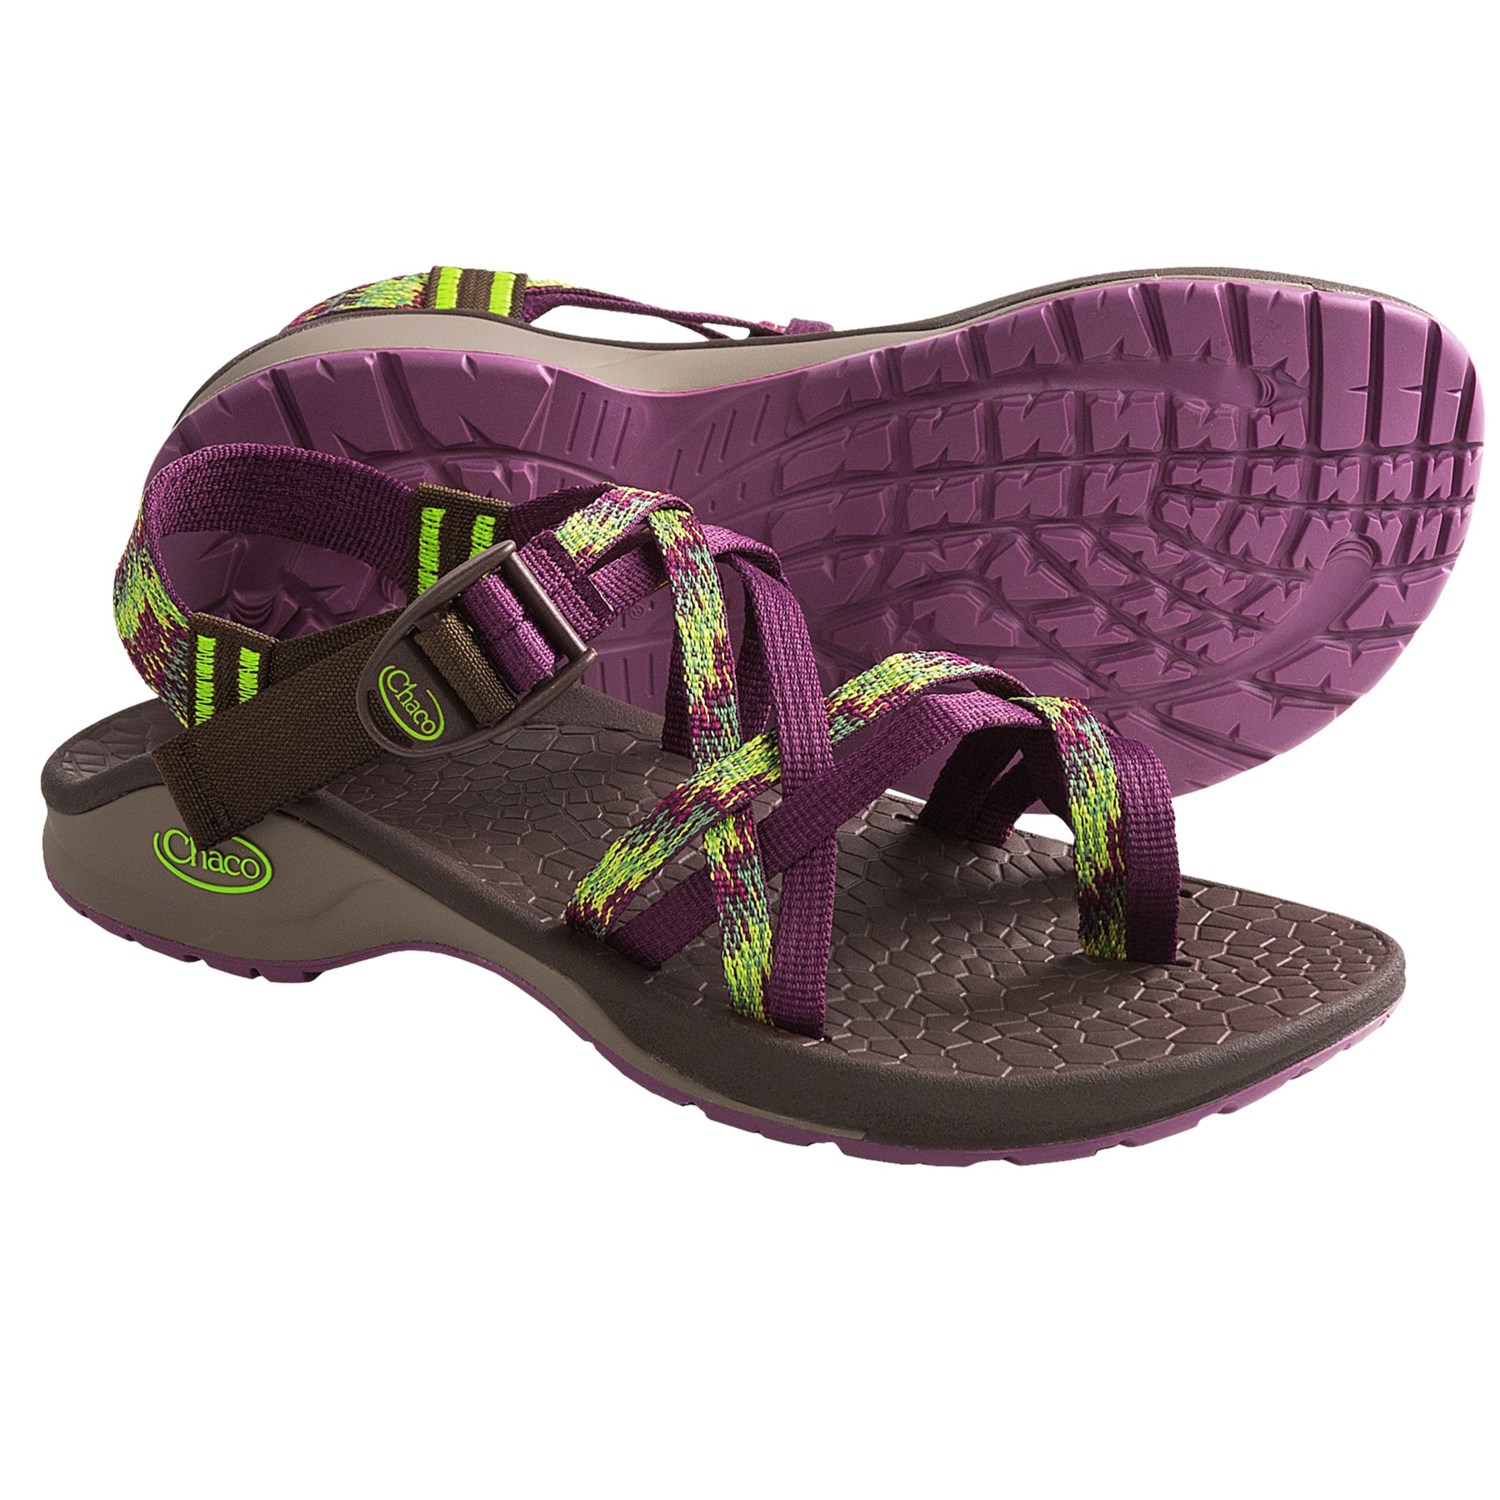 Chaco Updraft X2 Genweb Sport Sandals (For Women) in Impressionist